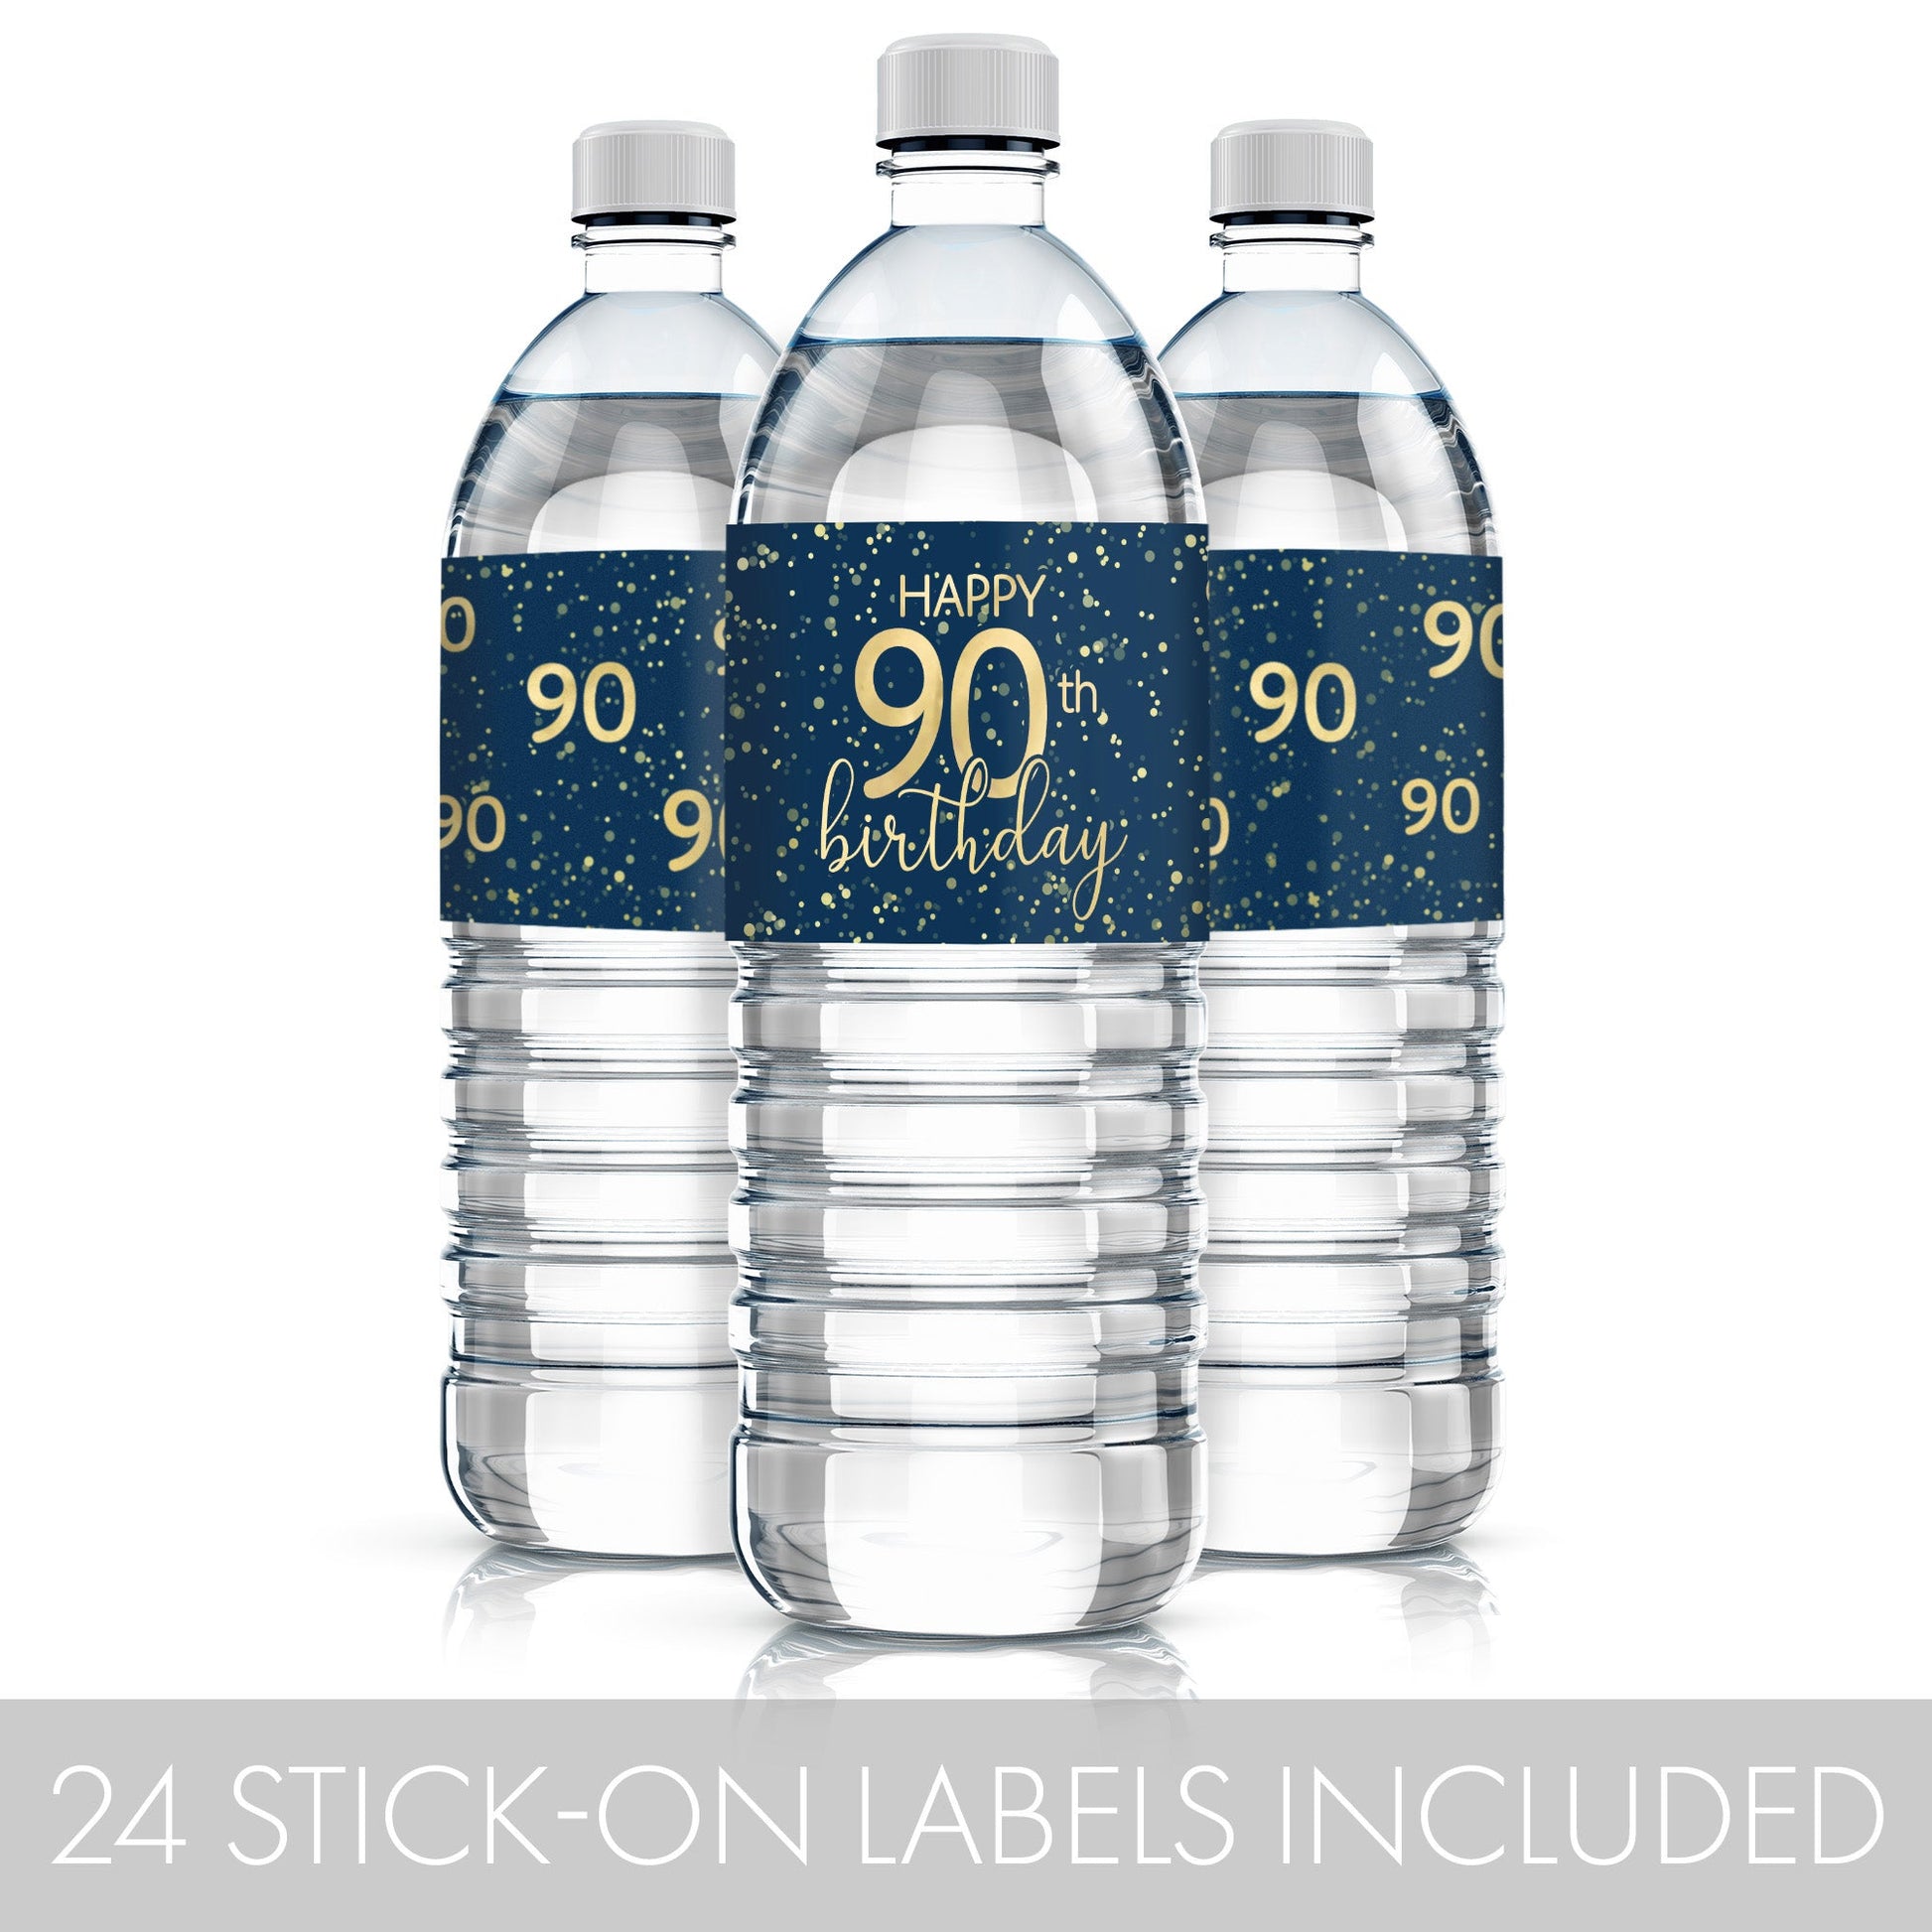 waterproof water bottle labels in navy blue with bold gold lettering that celebrates the milestone of an 90th birthday